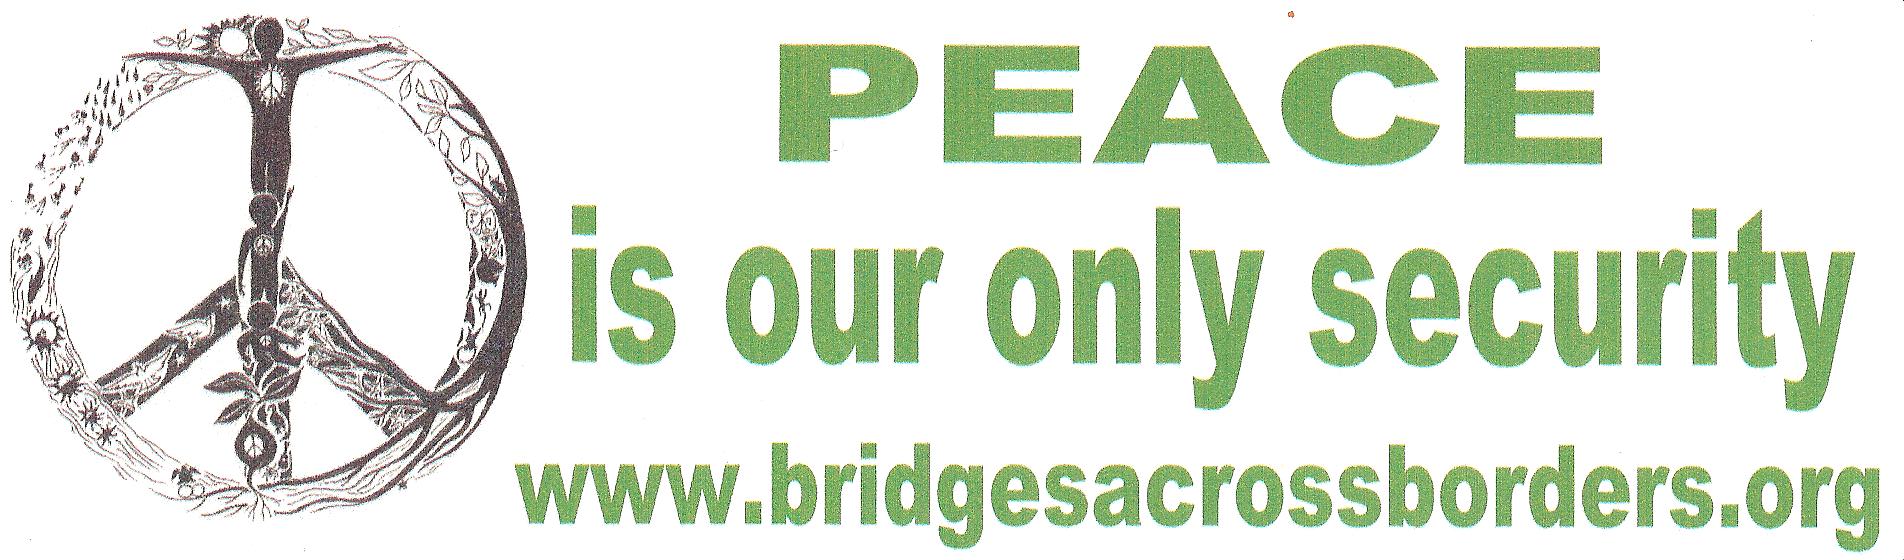 peace-is-security-bs